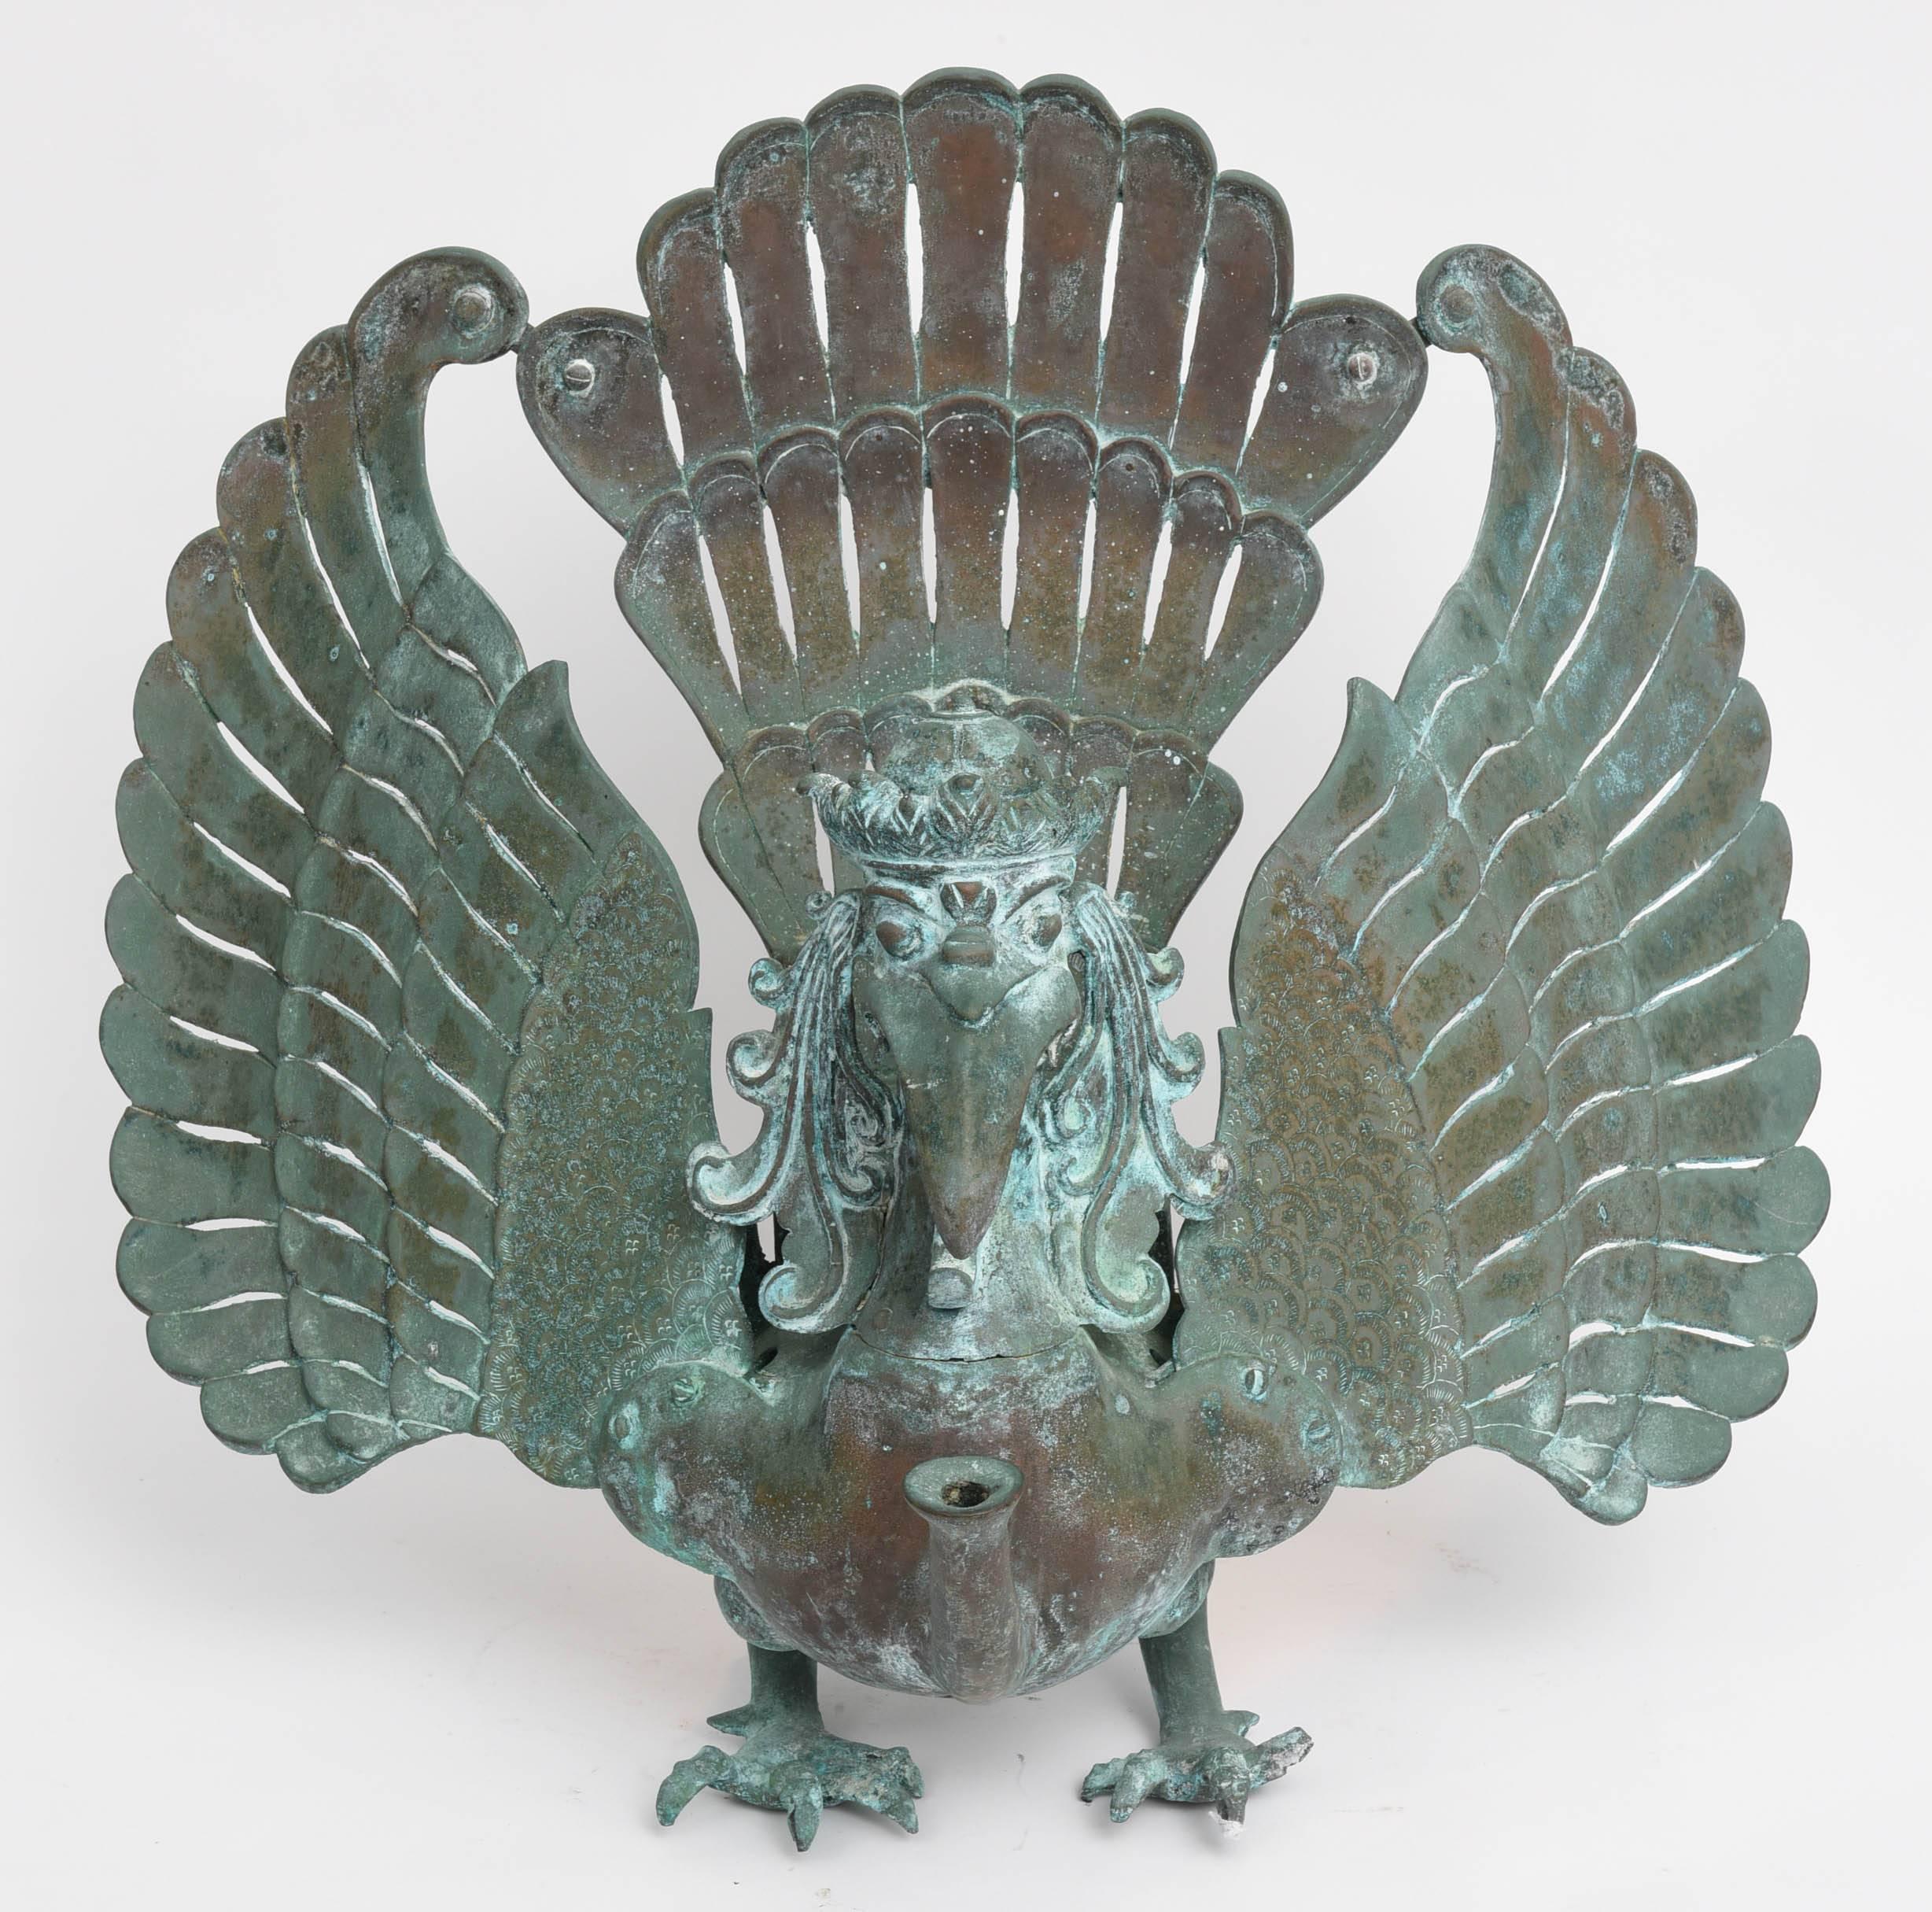 Garuda is a mythological human-like bird on which the Lord Vishnu rode in both Hindu and Buddhist culture.  It is a simple of ferocity and intelligence.

Reference is made to a similar Garuda sculpture in the Brooklyn Museum.